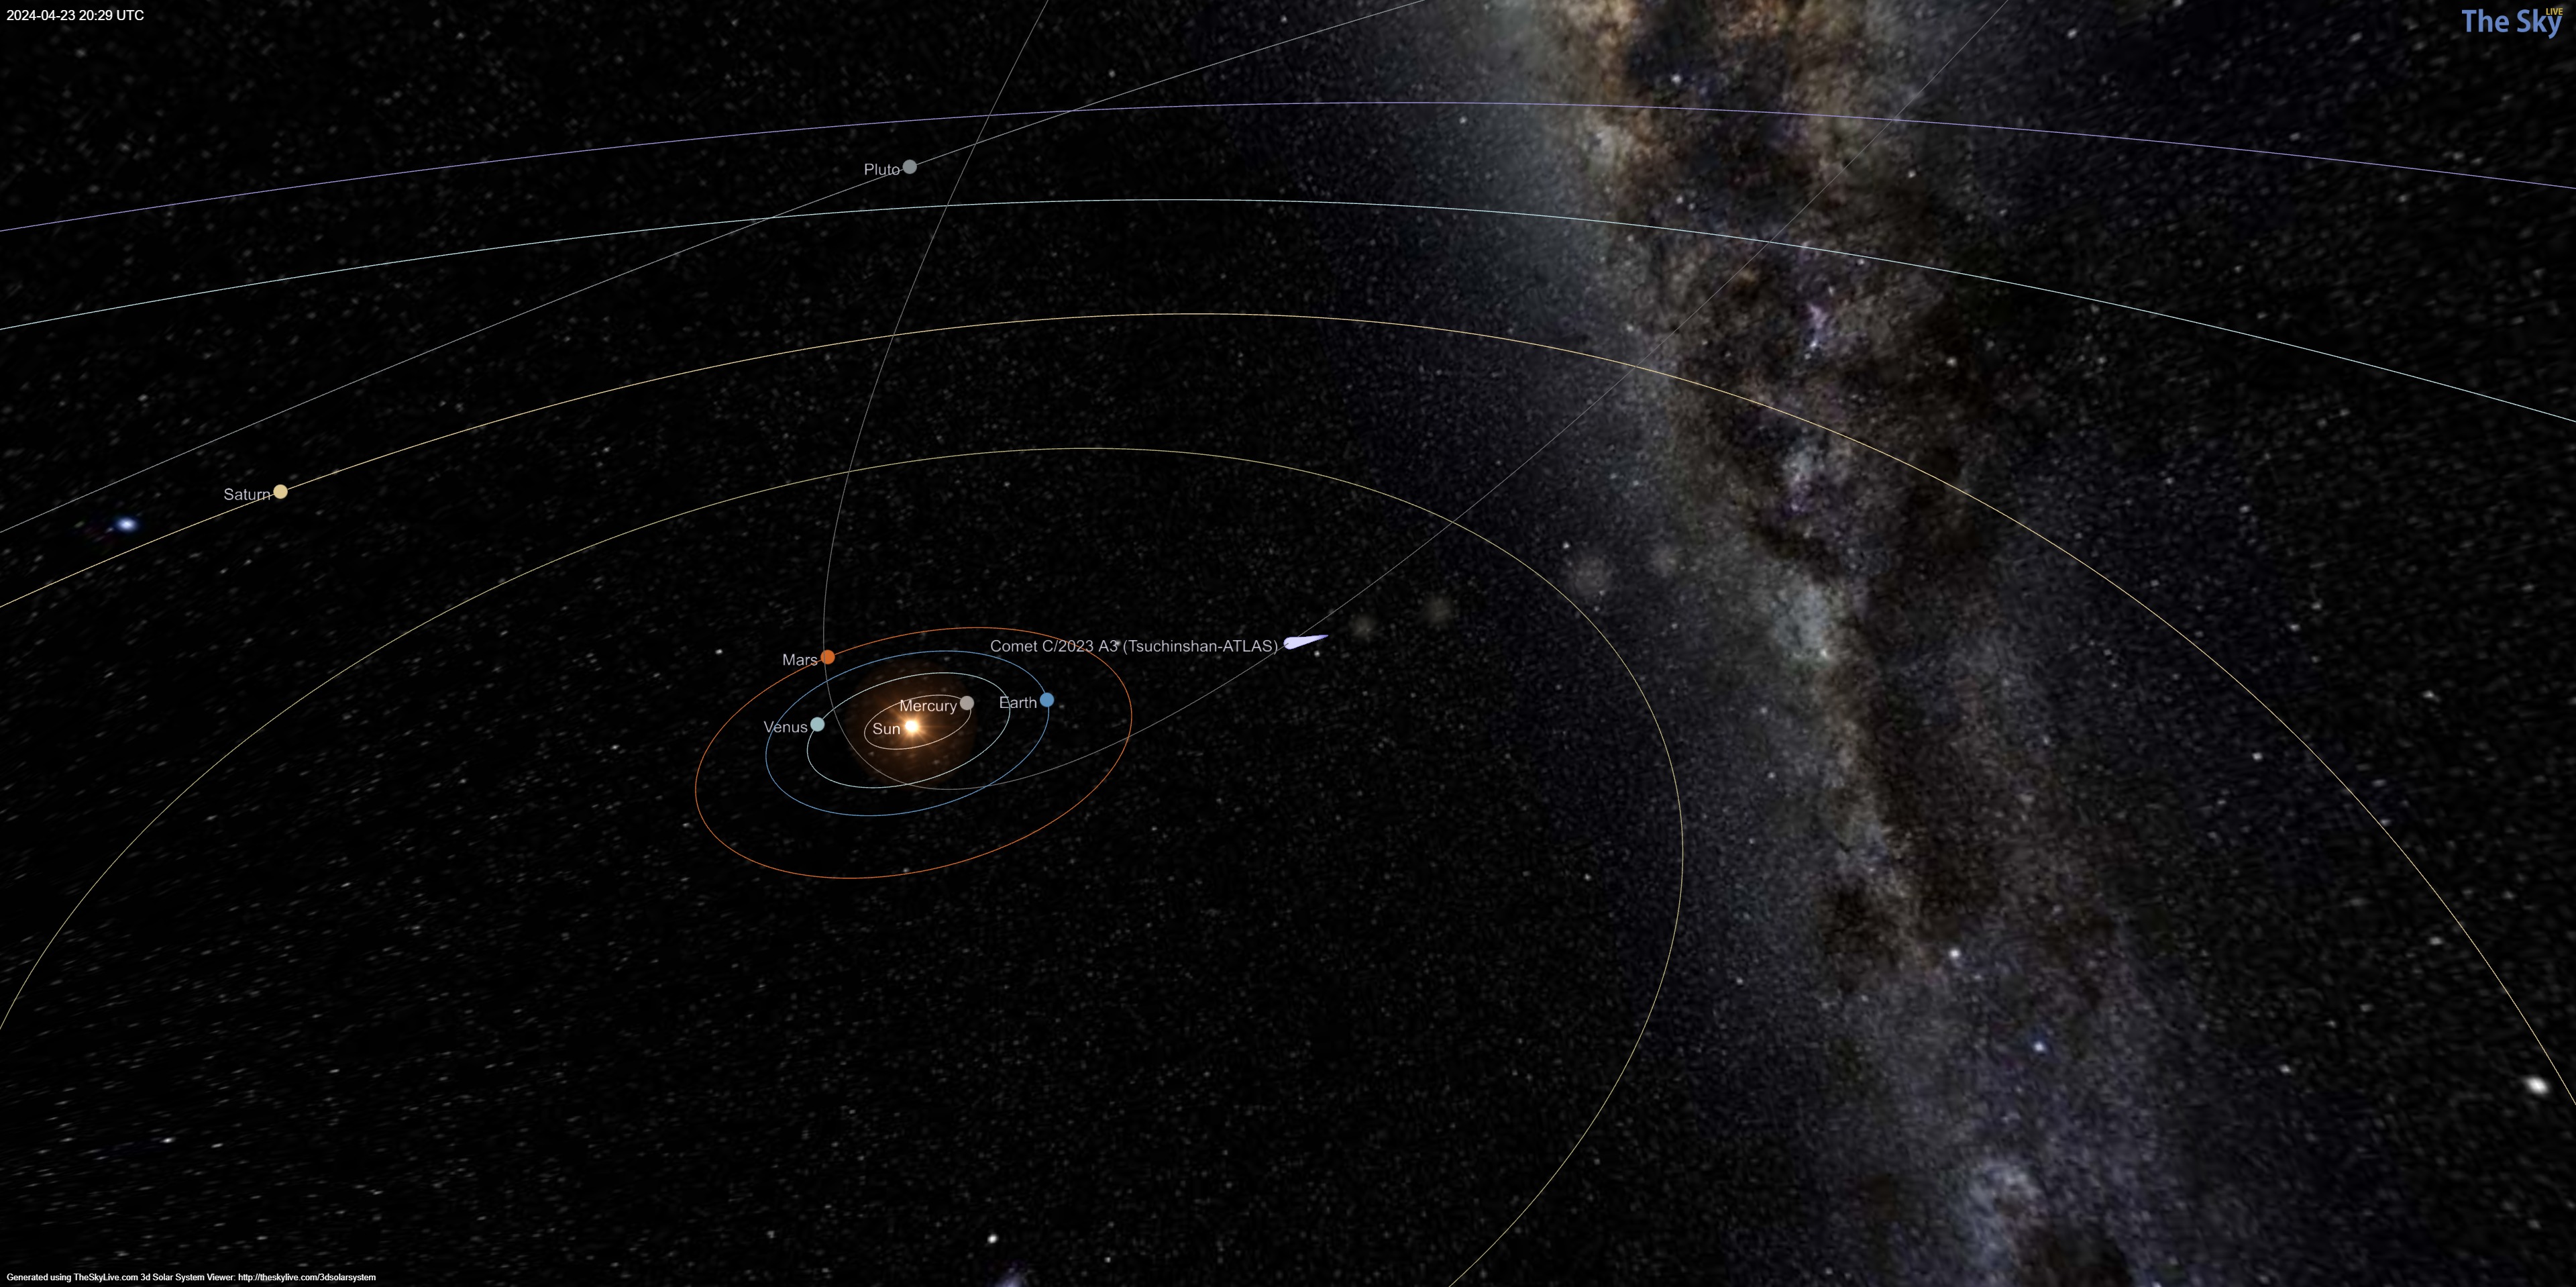 a map of the solar system showing a comet with a tail far out past the orbit of Mars